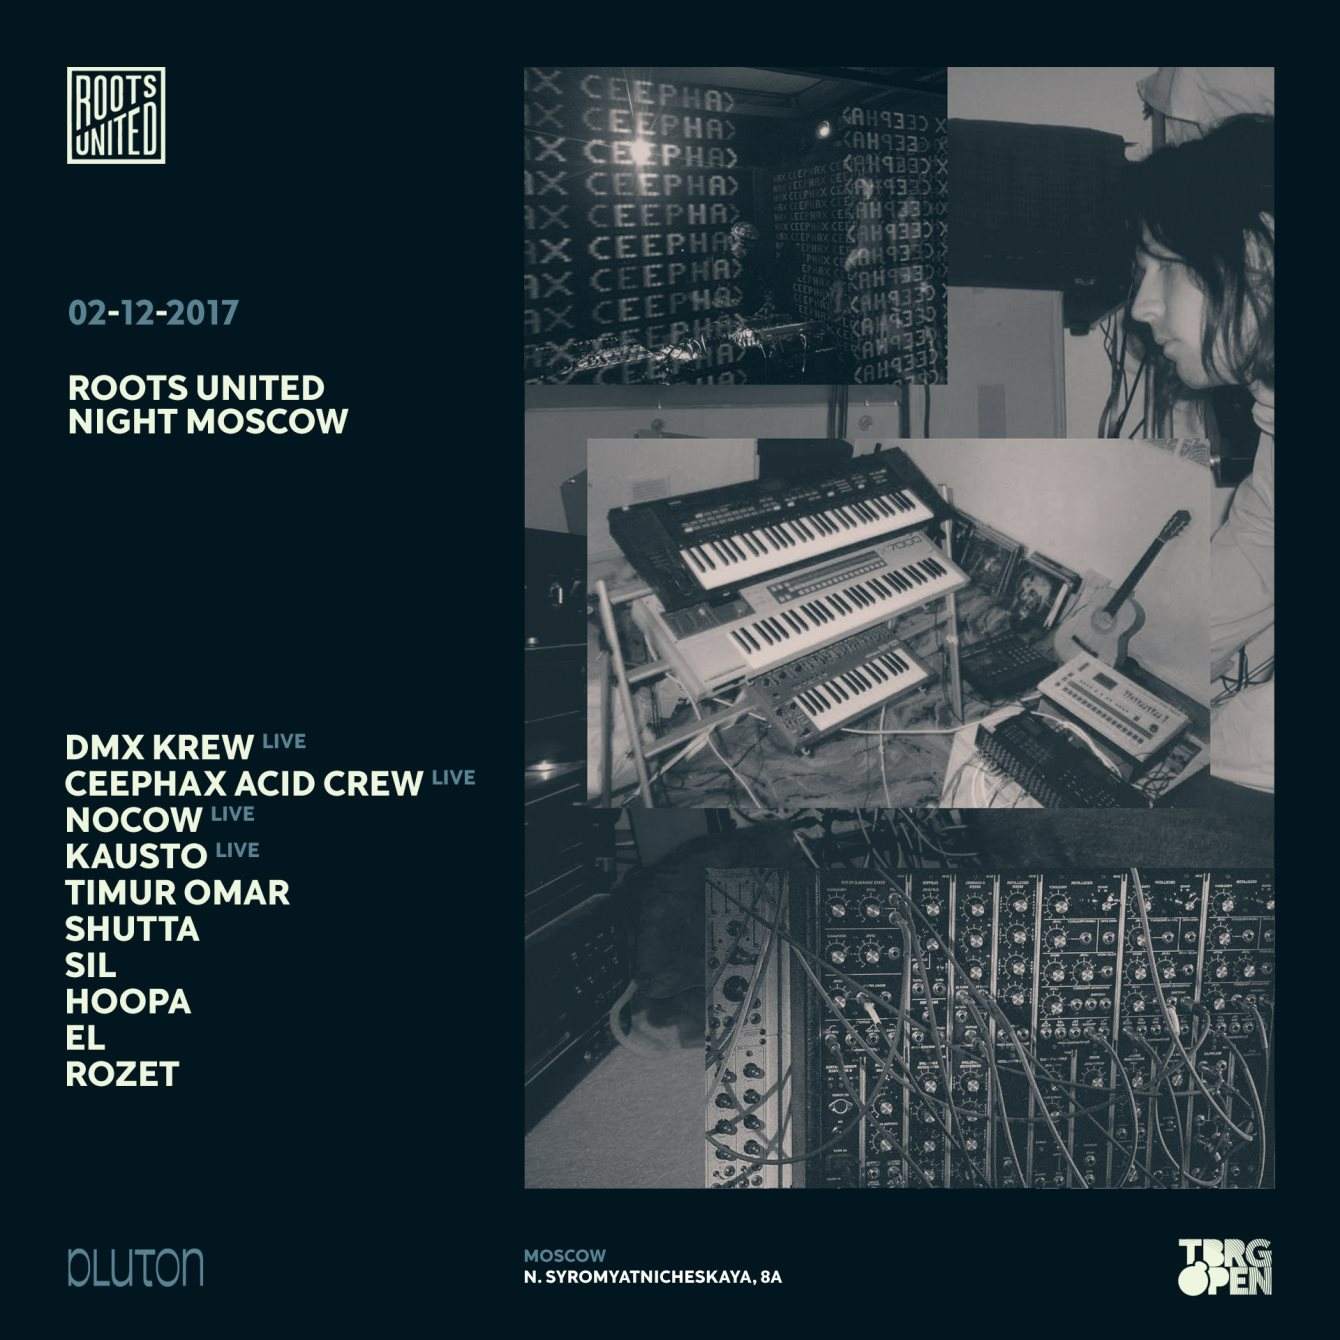 Roots United Night Moscow - フライヤー表